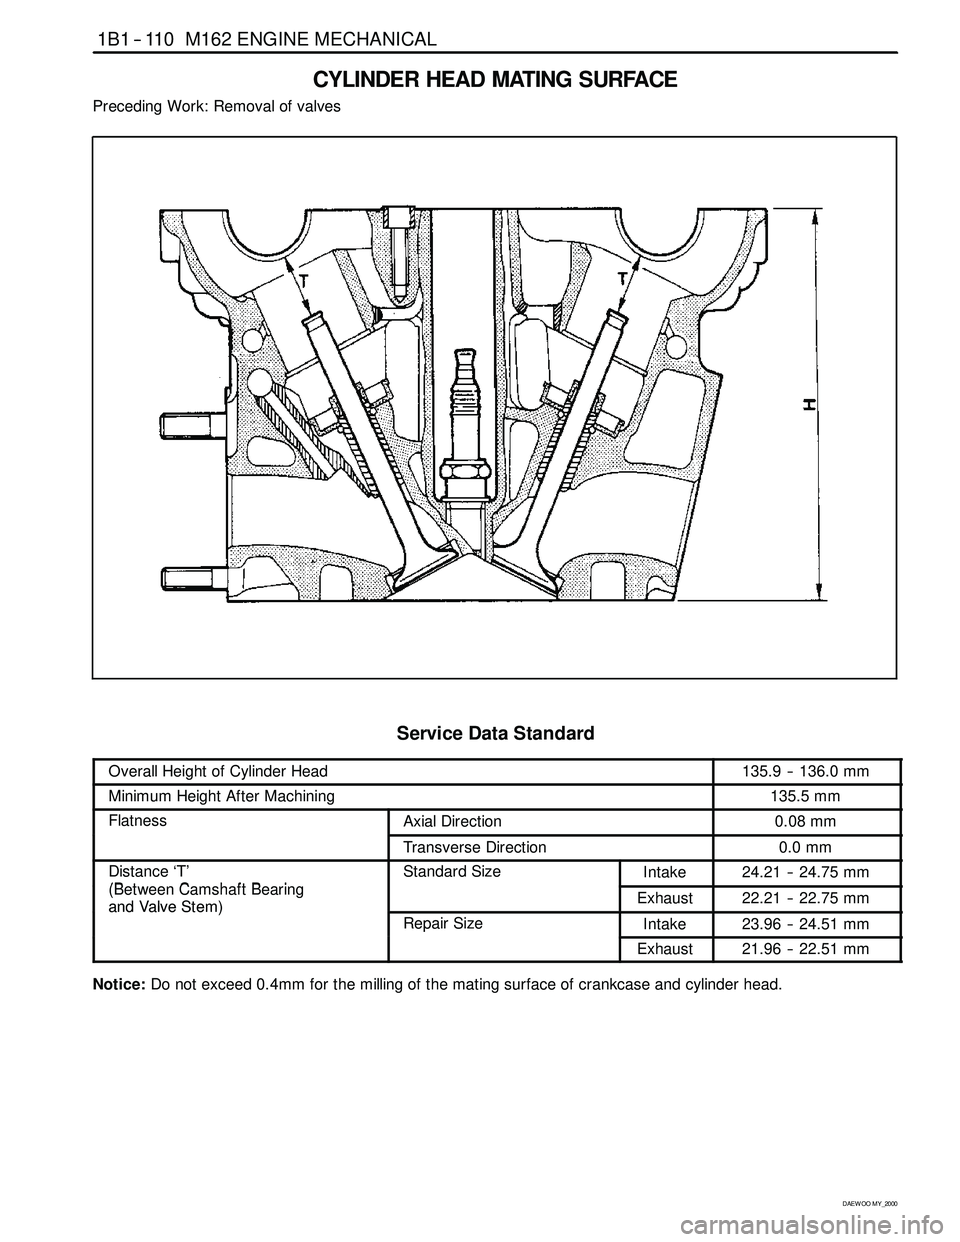 SSANGYONG KORANDO 1997  Service Repair Manual 1B1 -- 110 M162 ENGINE MECHANICAL
D AEW OO M Y_2000
CYLINDER HEAD MATING SURFACE
Preceding Work: Removal of valves
ServiceDataStandard
Overall Height of Cylinder Head135.9 -- 136.0 mm
Minimum Height A